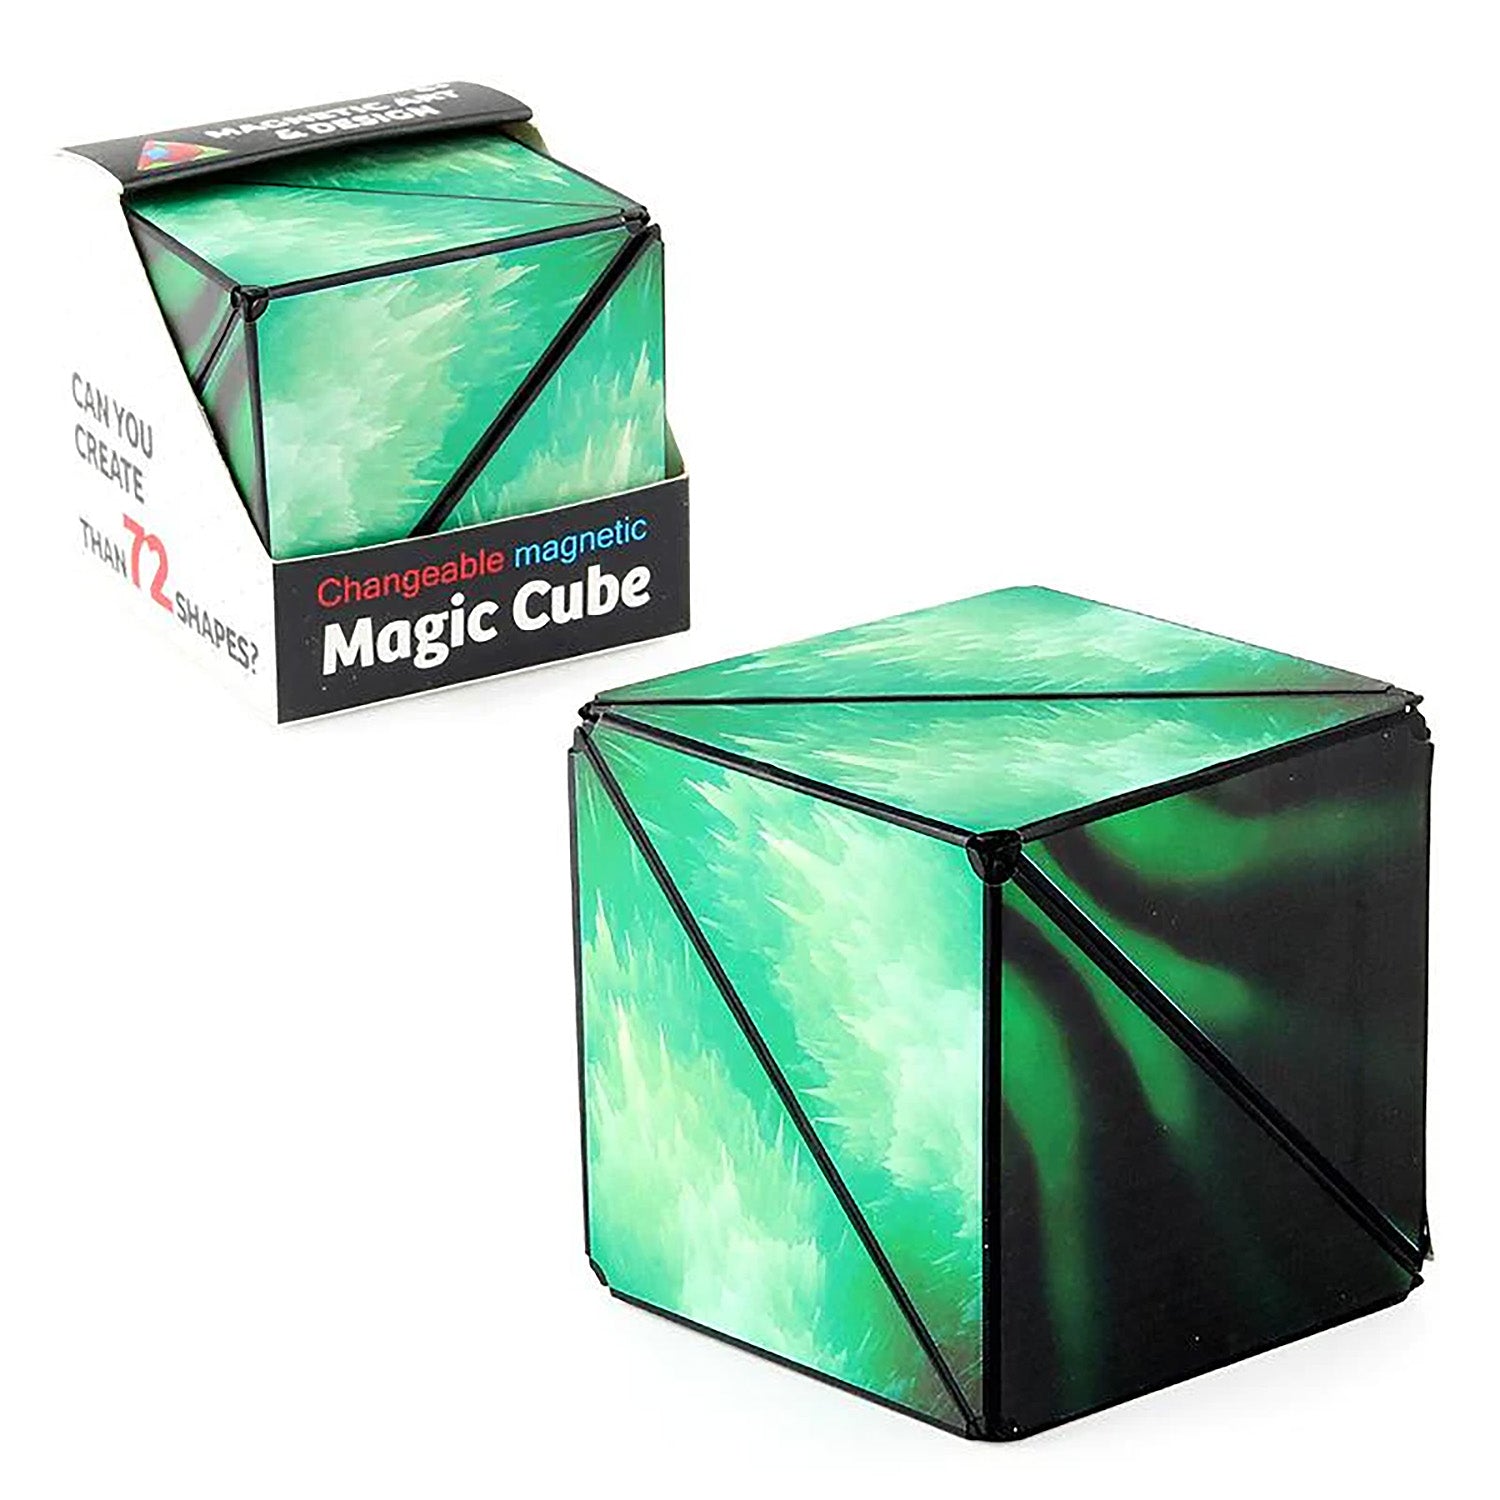 3D Changeable Magnetic Magic Cube, Shape Shifting Box Fidget Toy (Green Version)